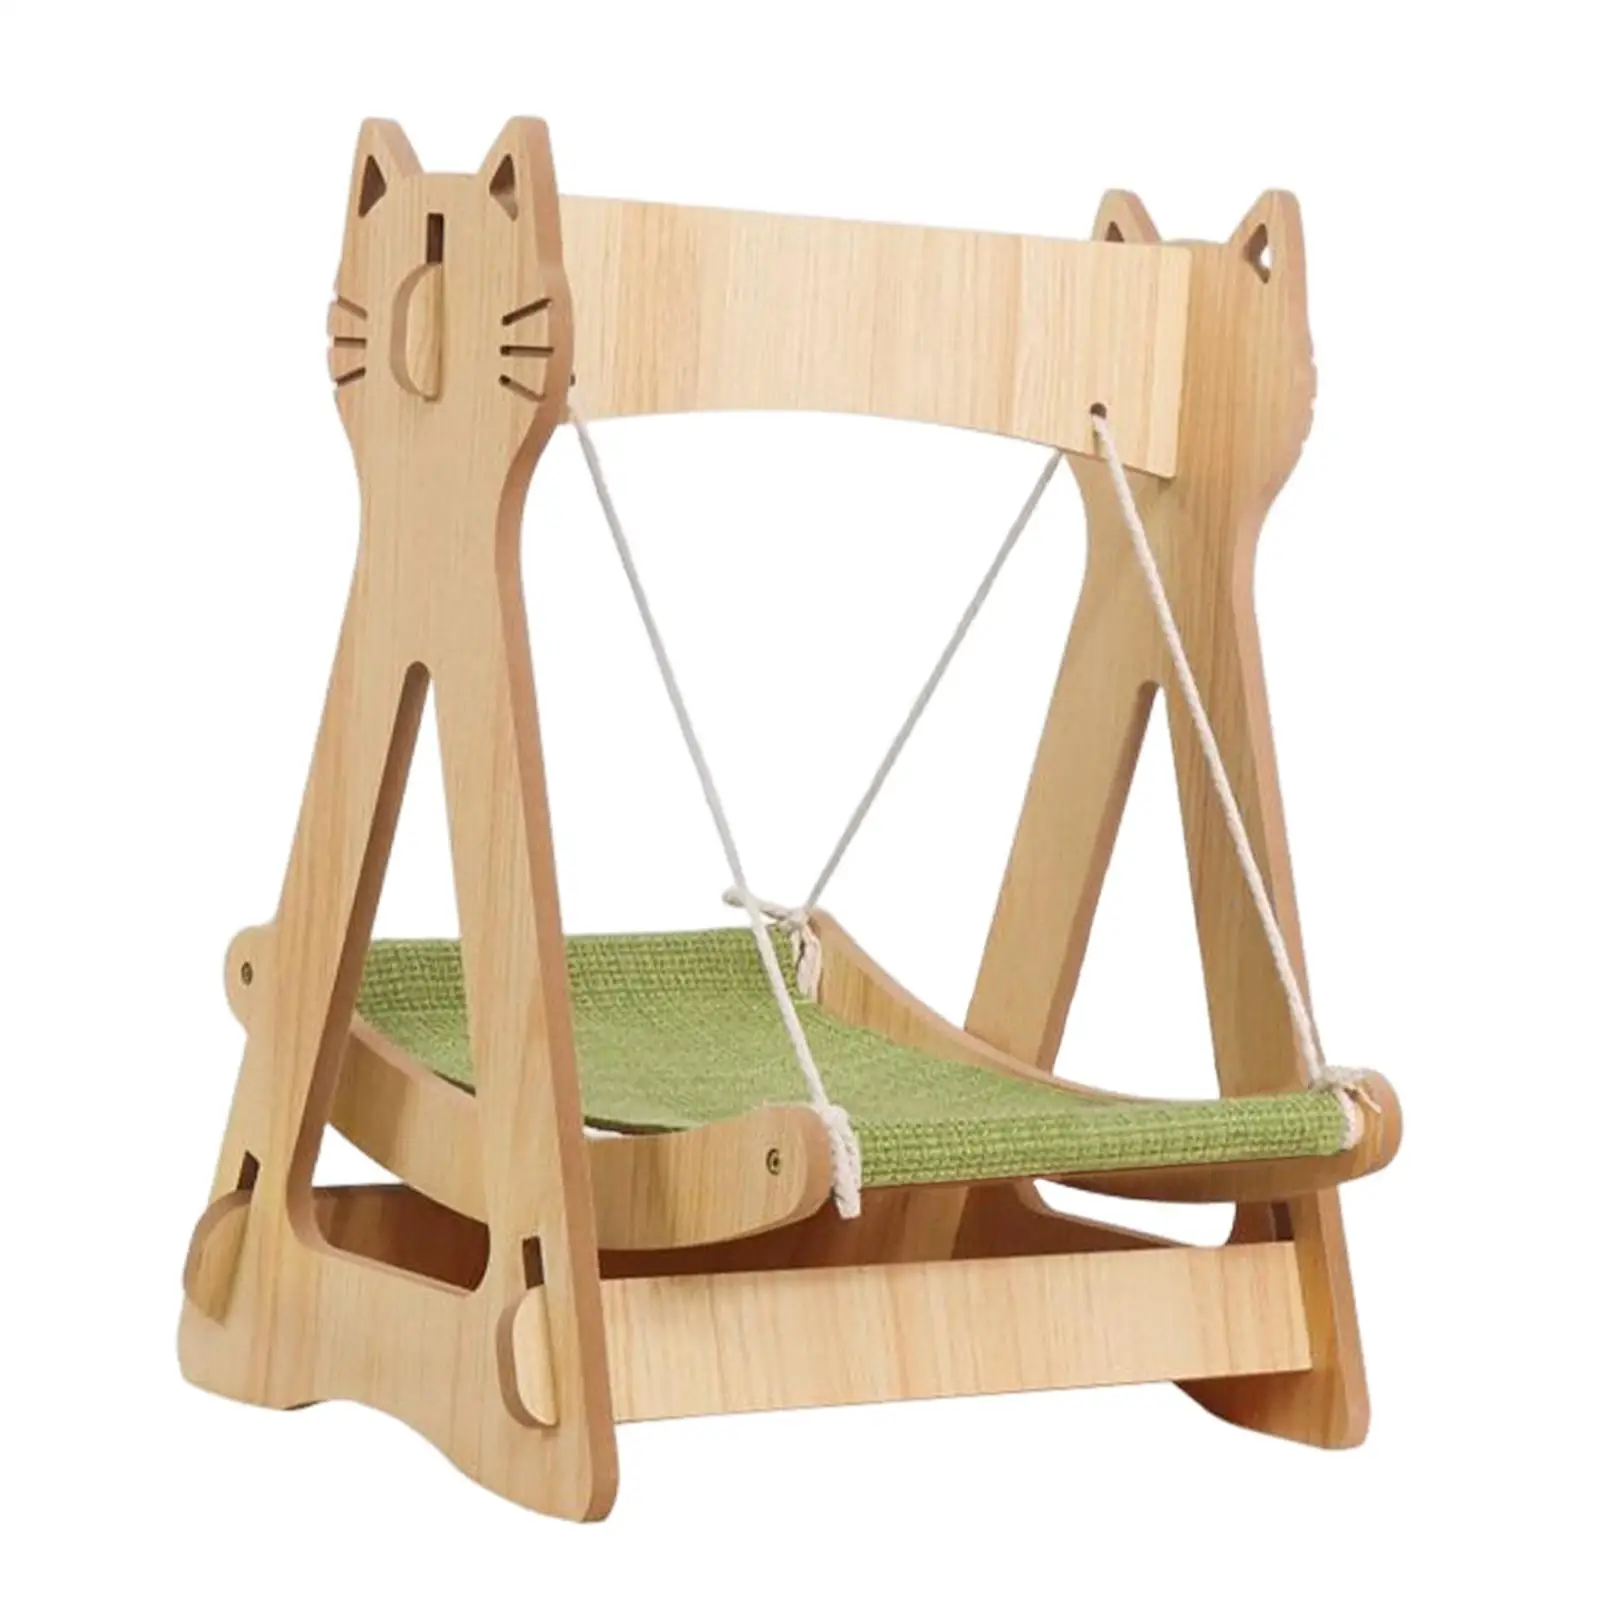 Cat Hammock, Pet Hanging Swing, Durable Frame, Wooden Lounger, Raised Pet Bed, Toy